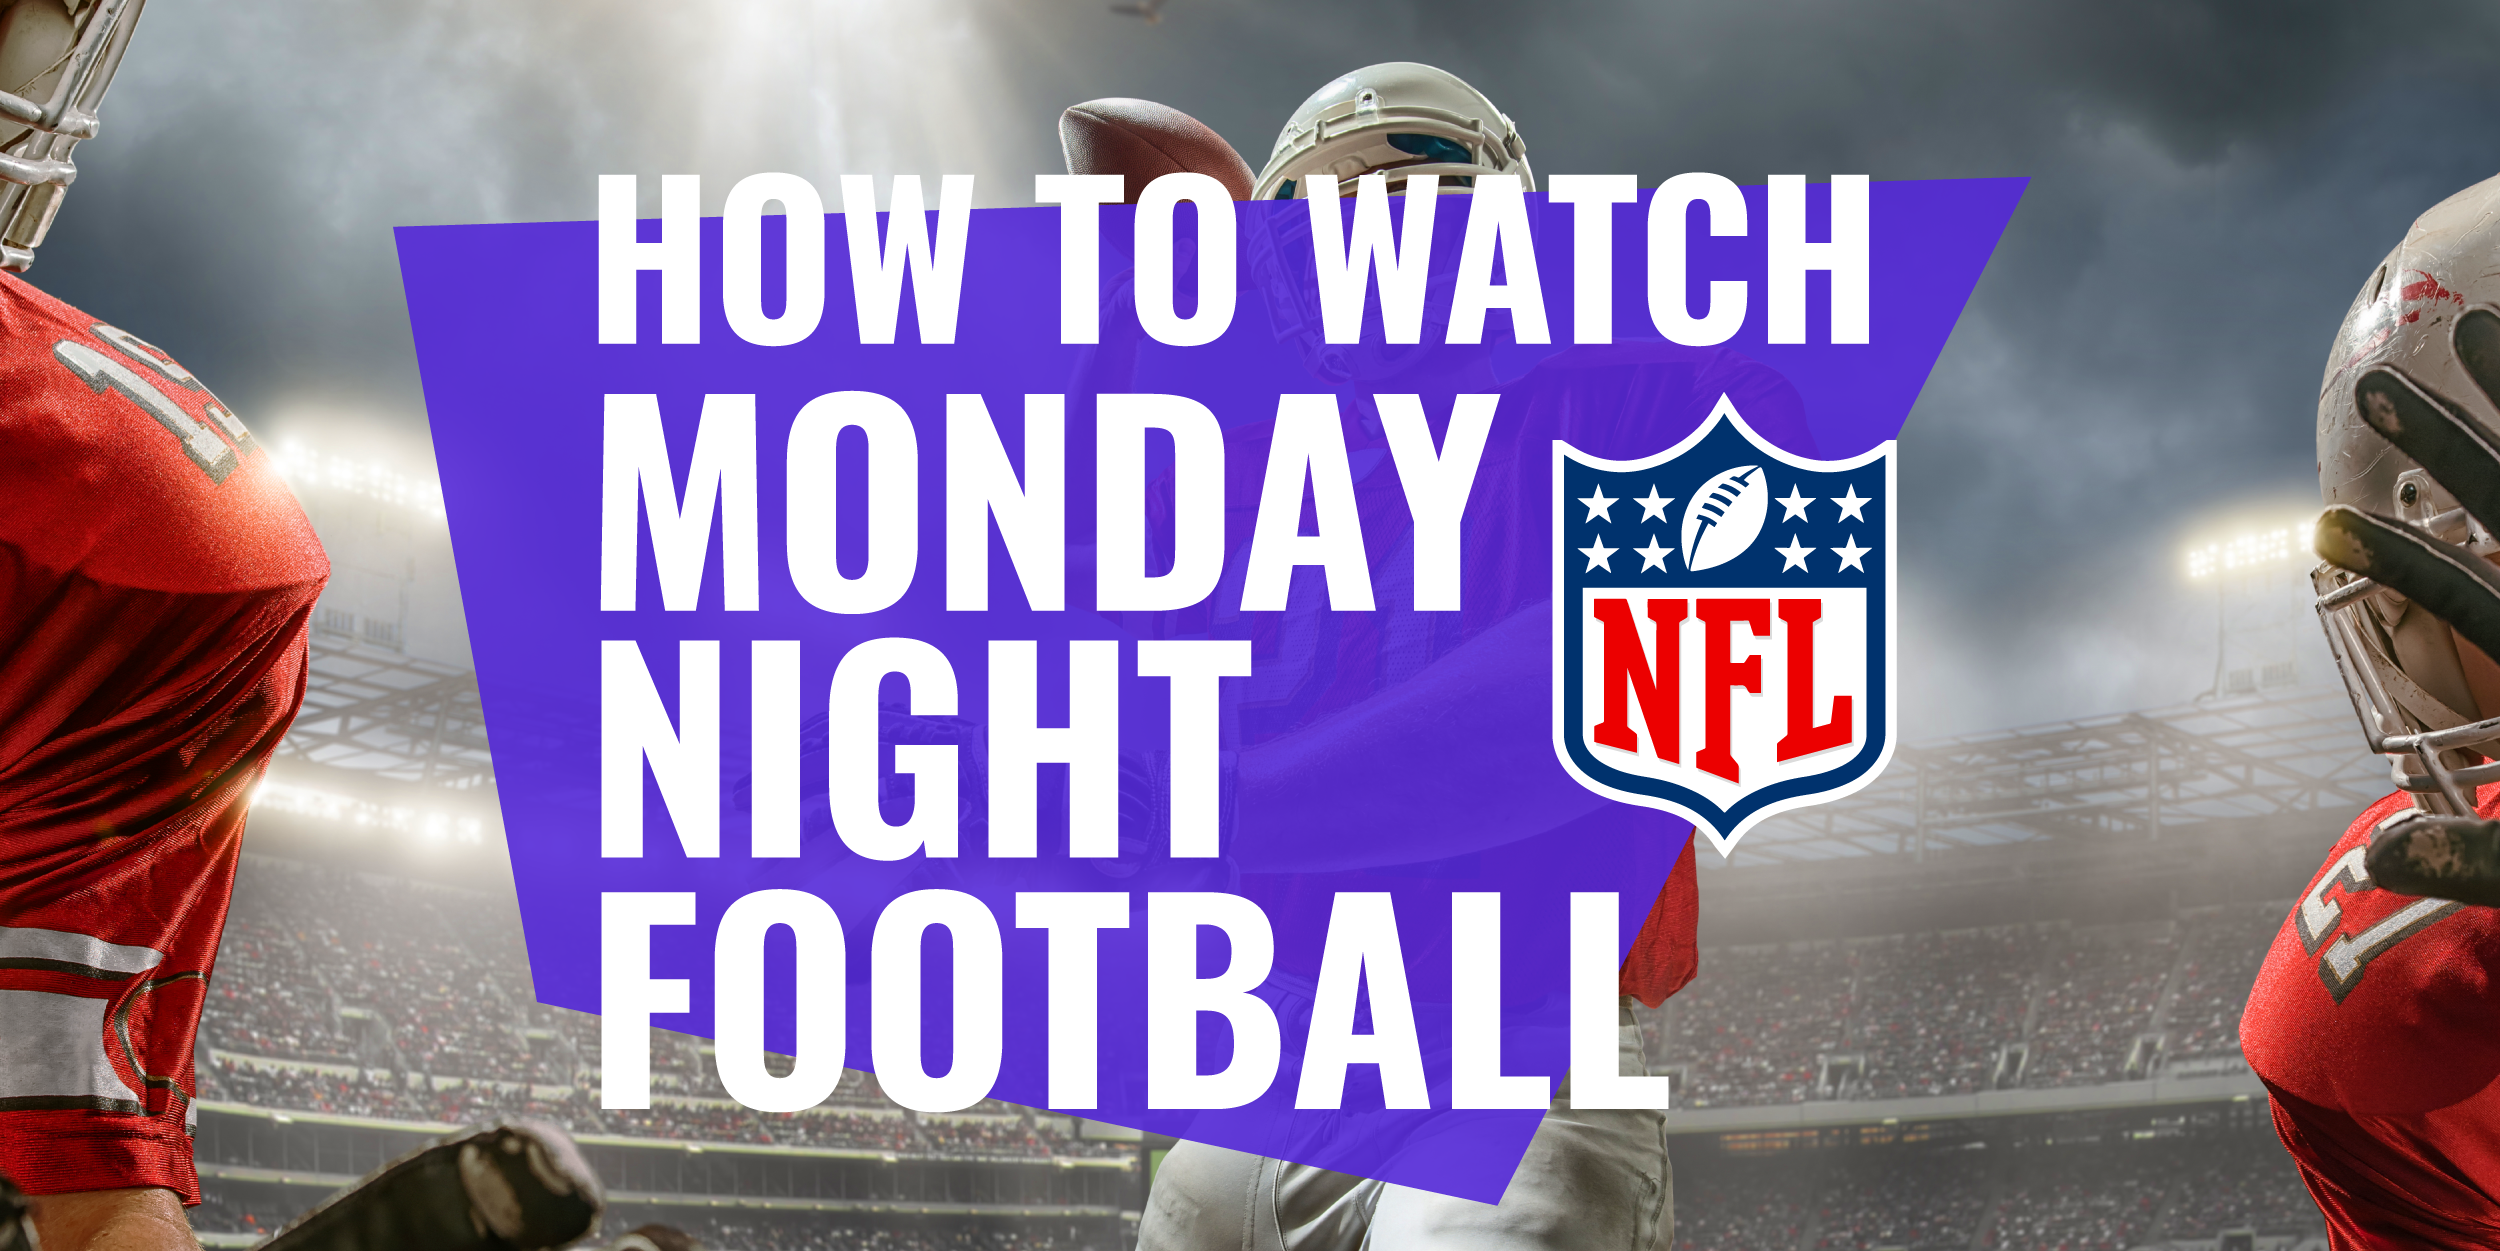 what channel is tonight's monday night game on